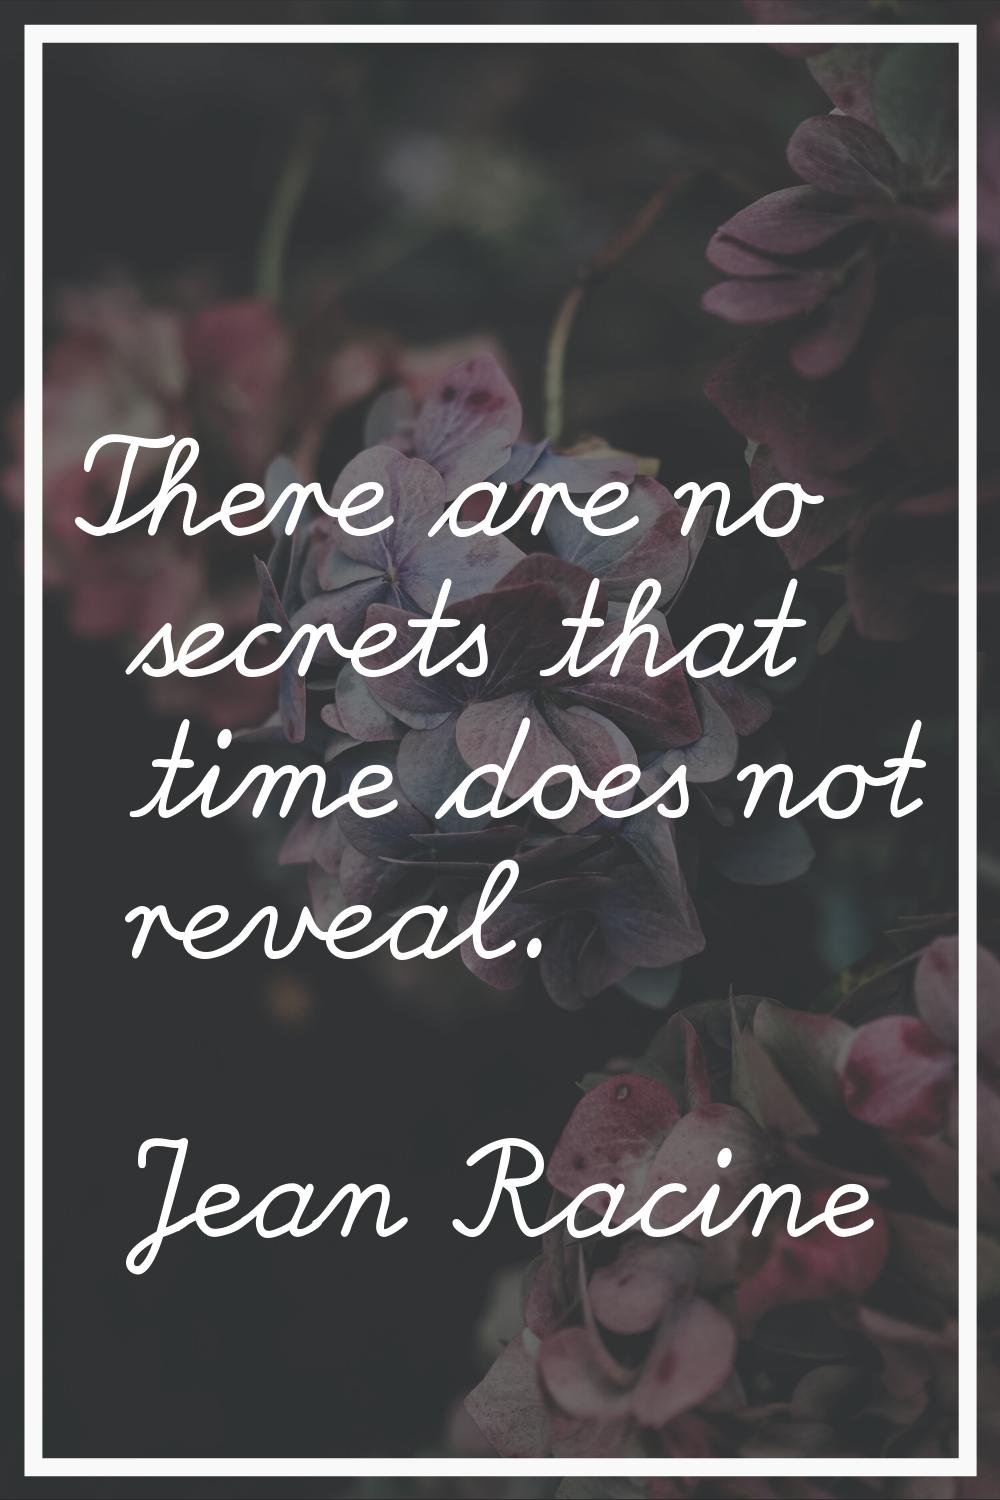 There are no secrets that time does not reveal.